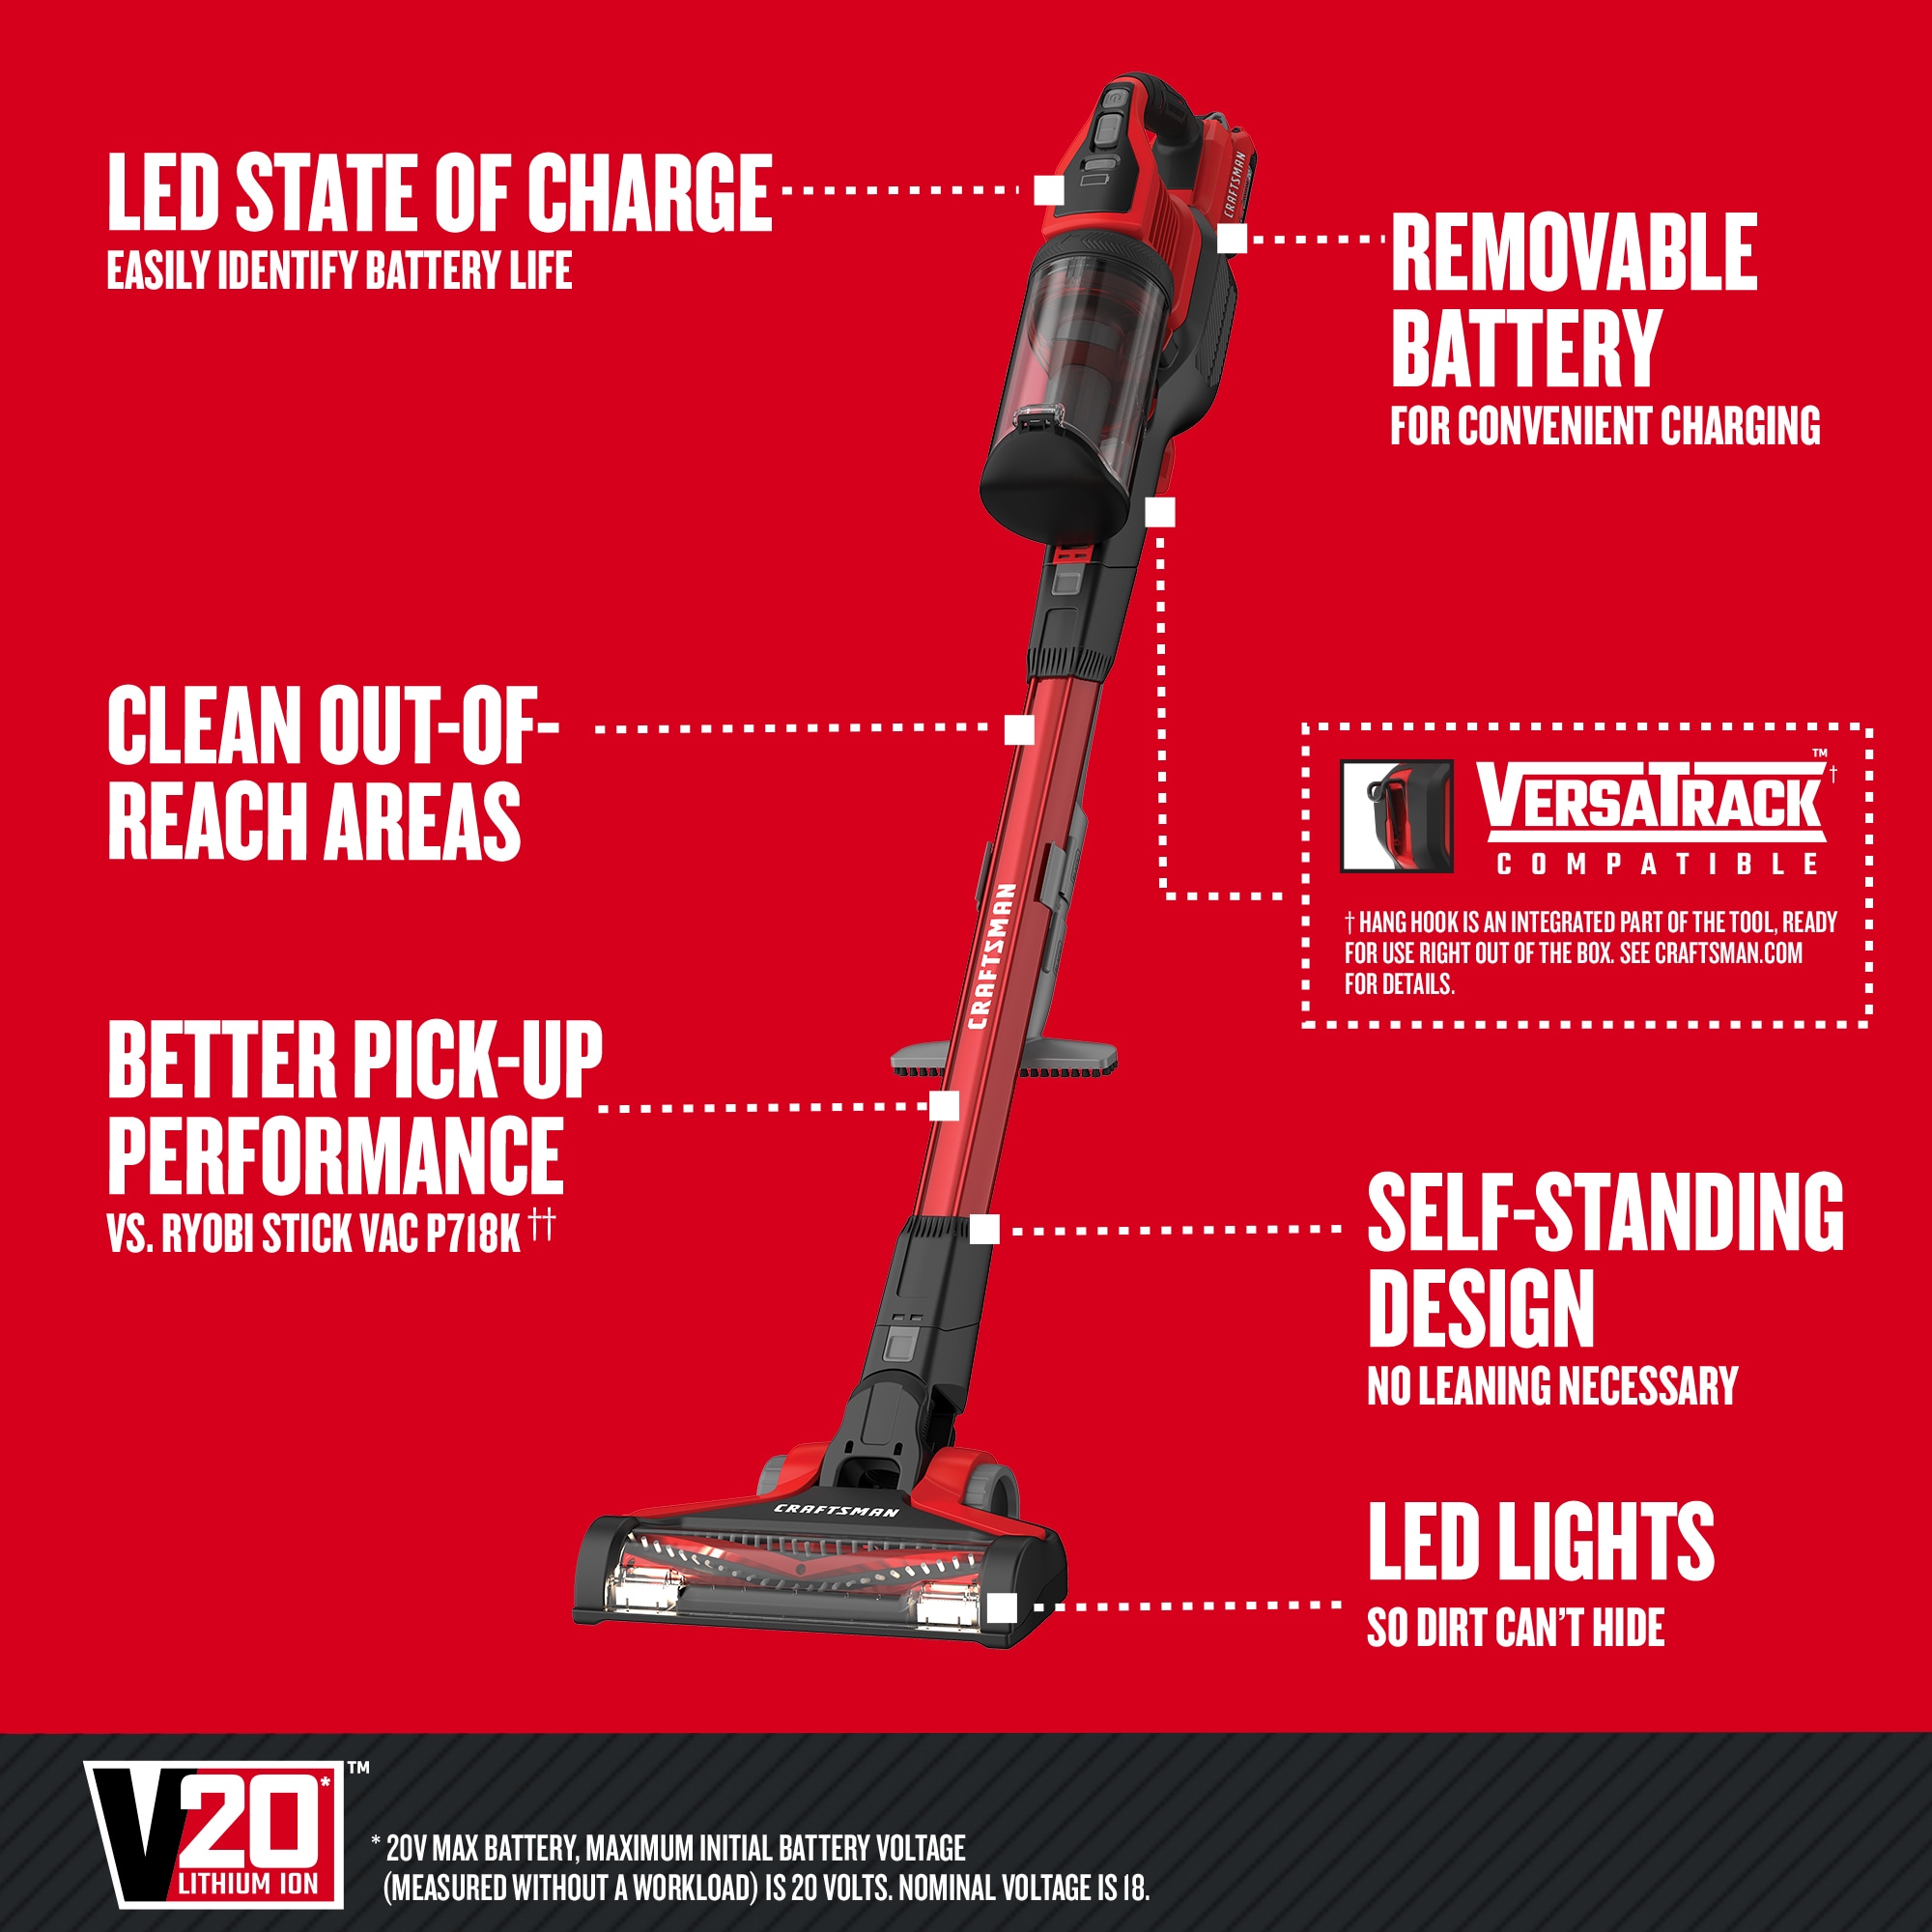 Cordless vs. Corded Vacuum: Which Should You Choose?